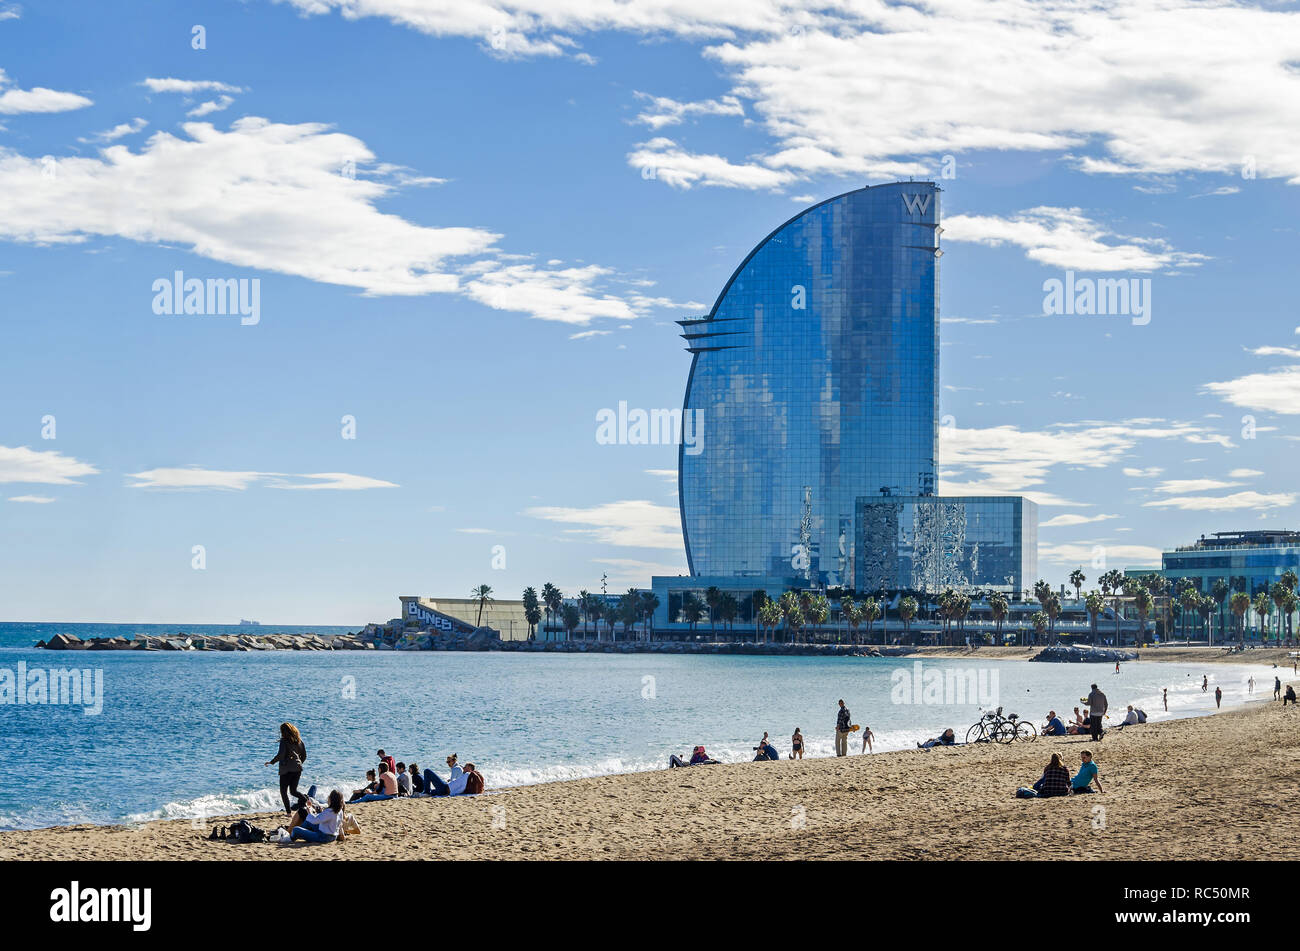 Barcelona, Spain - November 10, 2018: Sant Miquel beach, one of the city's oldest beaches, and W Barcelona, also known as the Hotel Vela (Sail Hotel)  Stock Photo